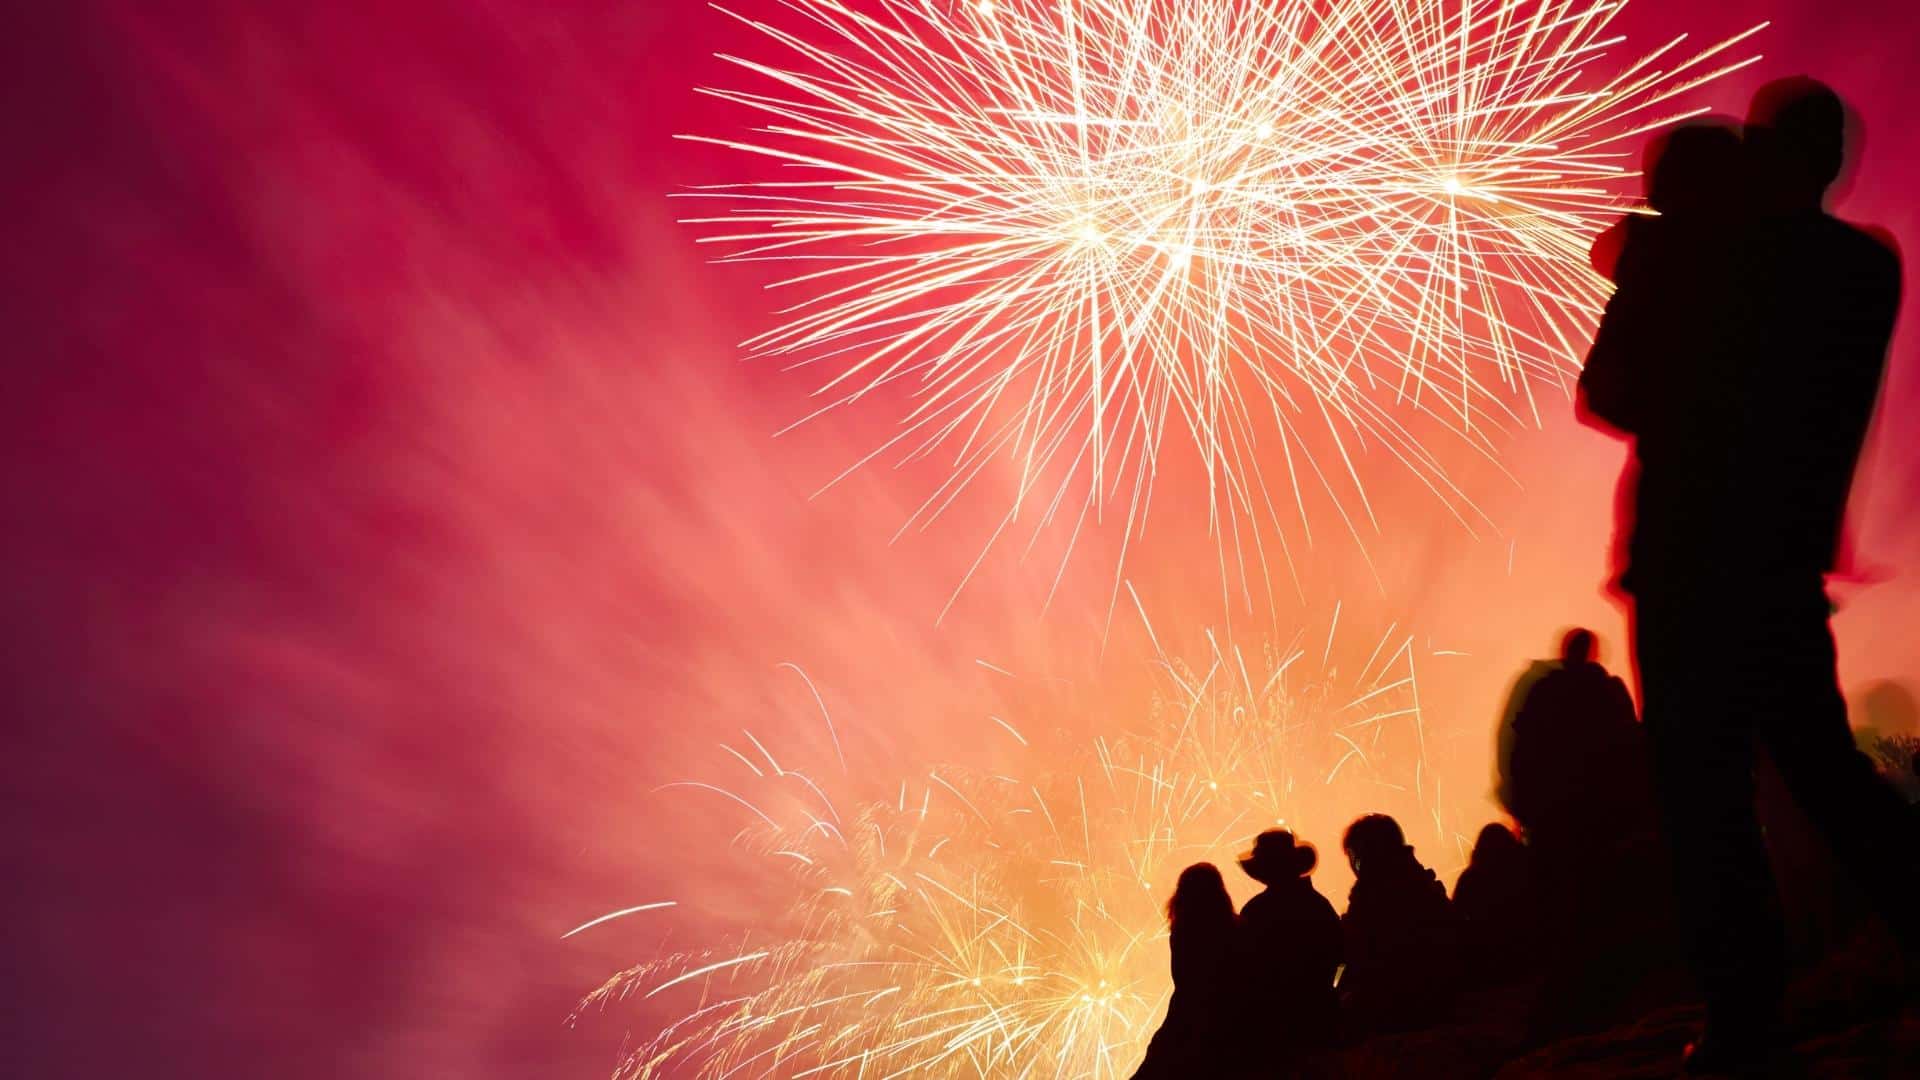 Where to Find Fireworks in Orlando